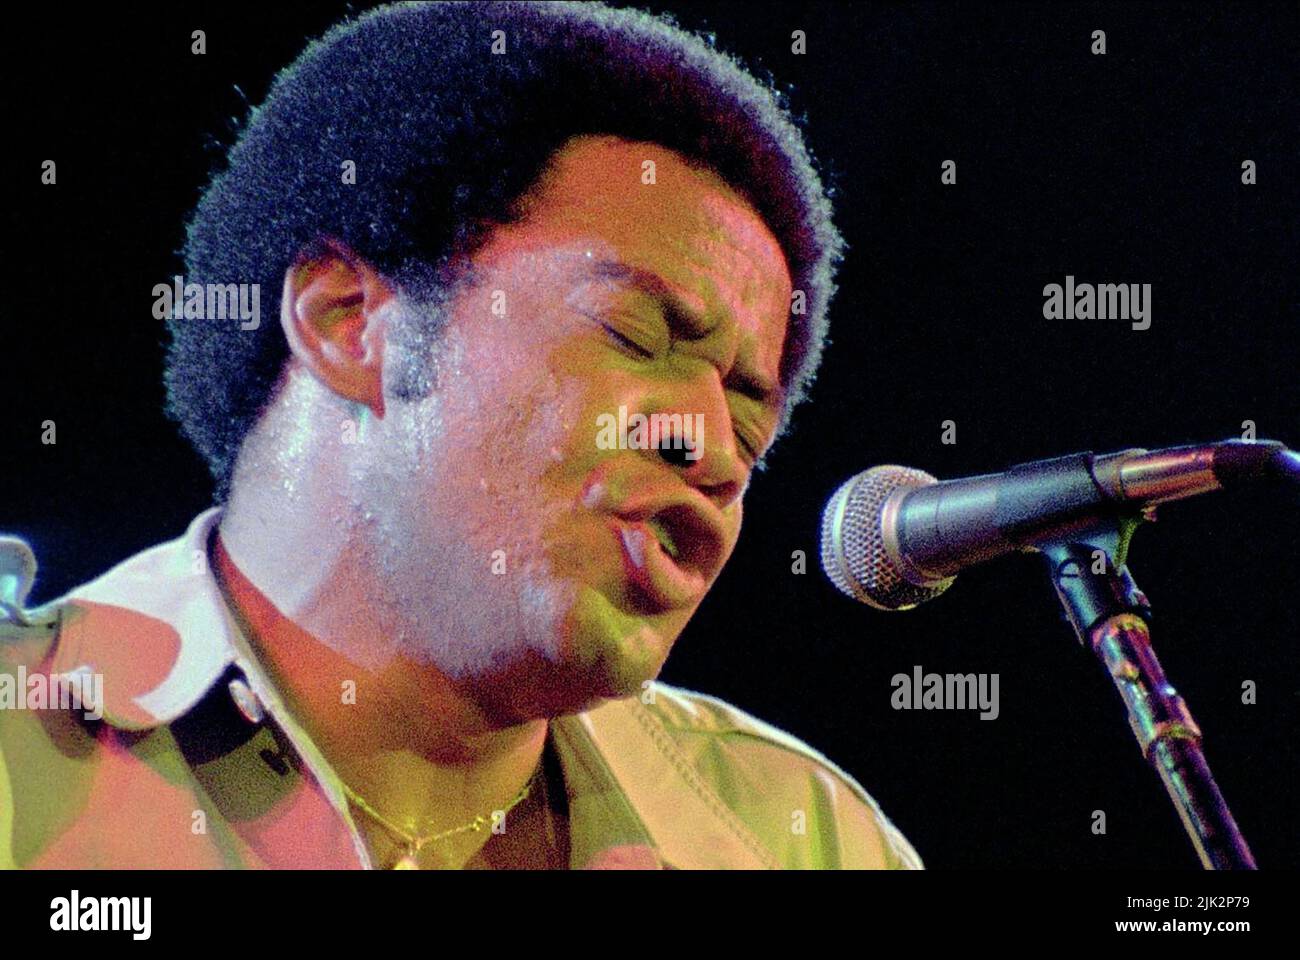 BILL WITHERS, SOUL POWER, 2008, Stockfoto